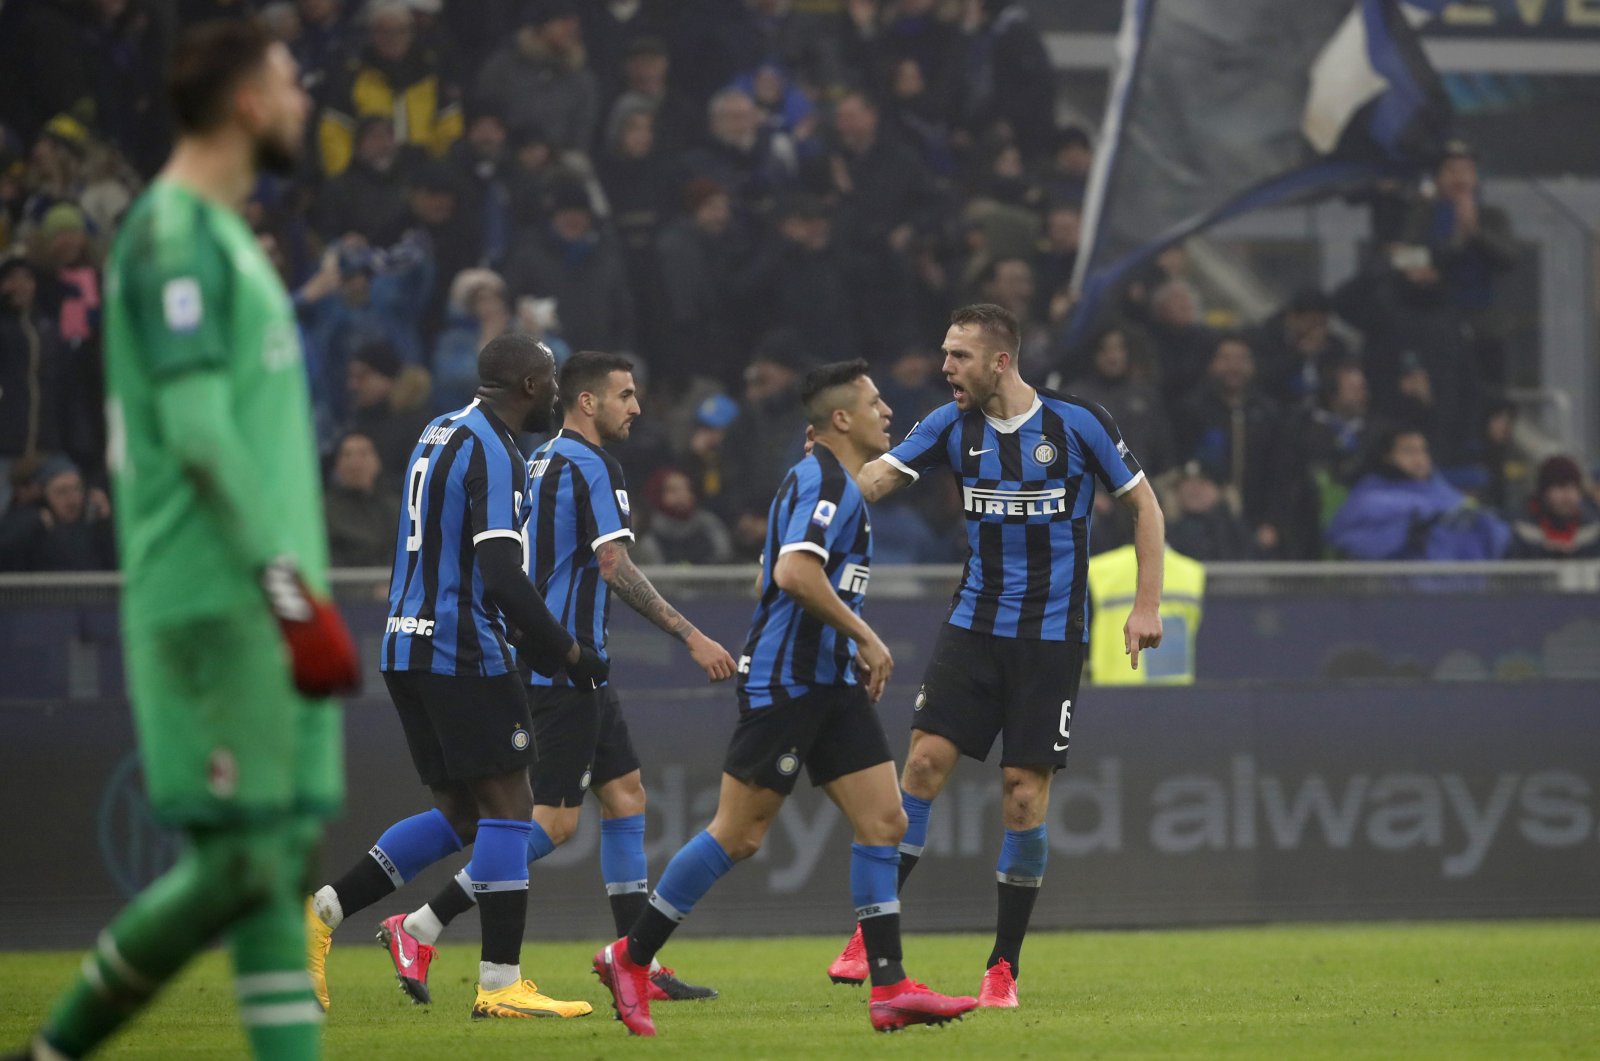 Inter Milan players celebrate a goal during a Serie A match against AC Milan, in Milan, Italy, Feb. 9, 2020. (AP Photo)